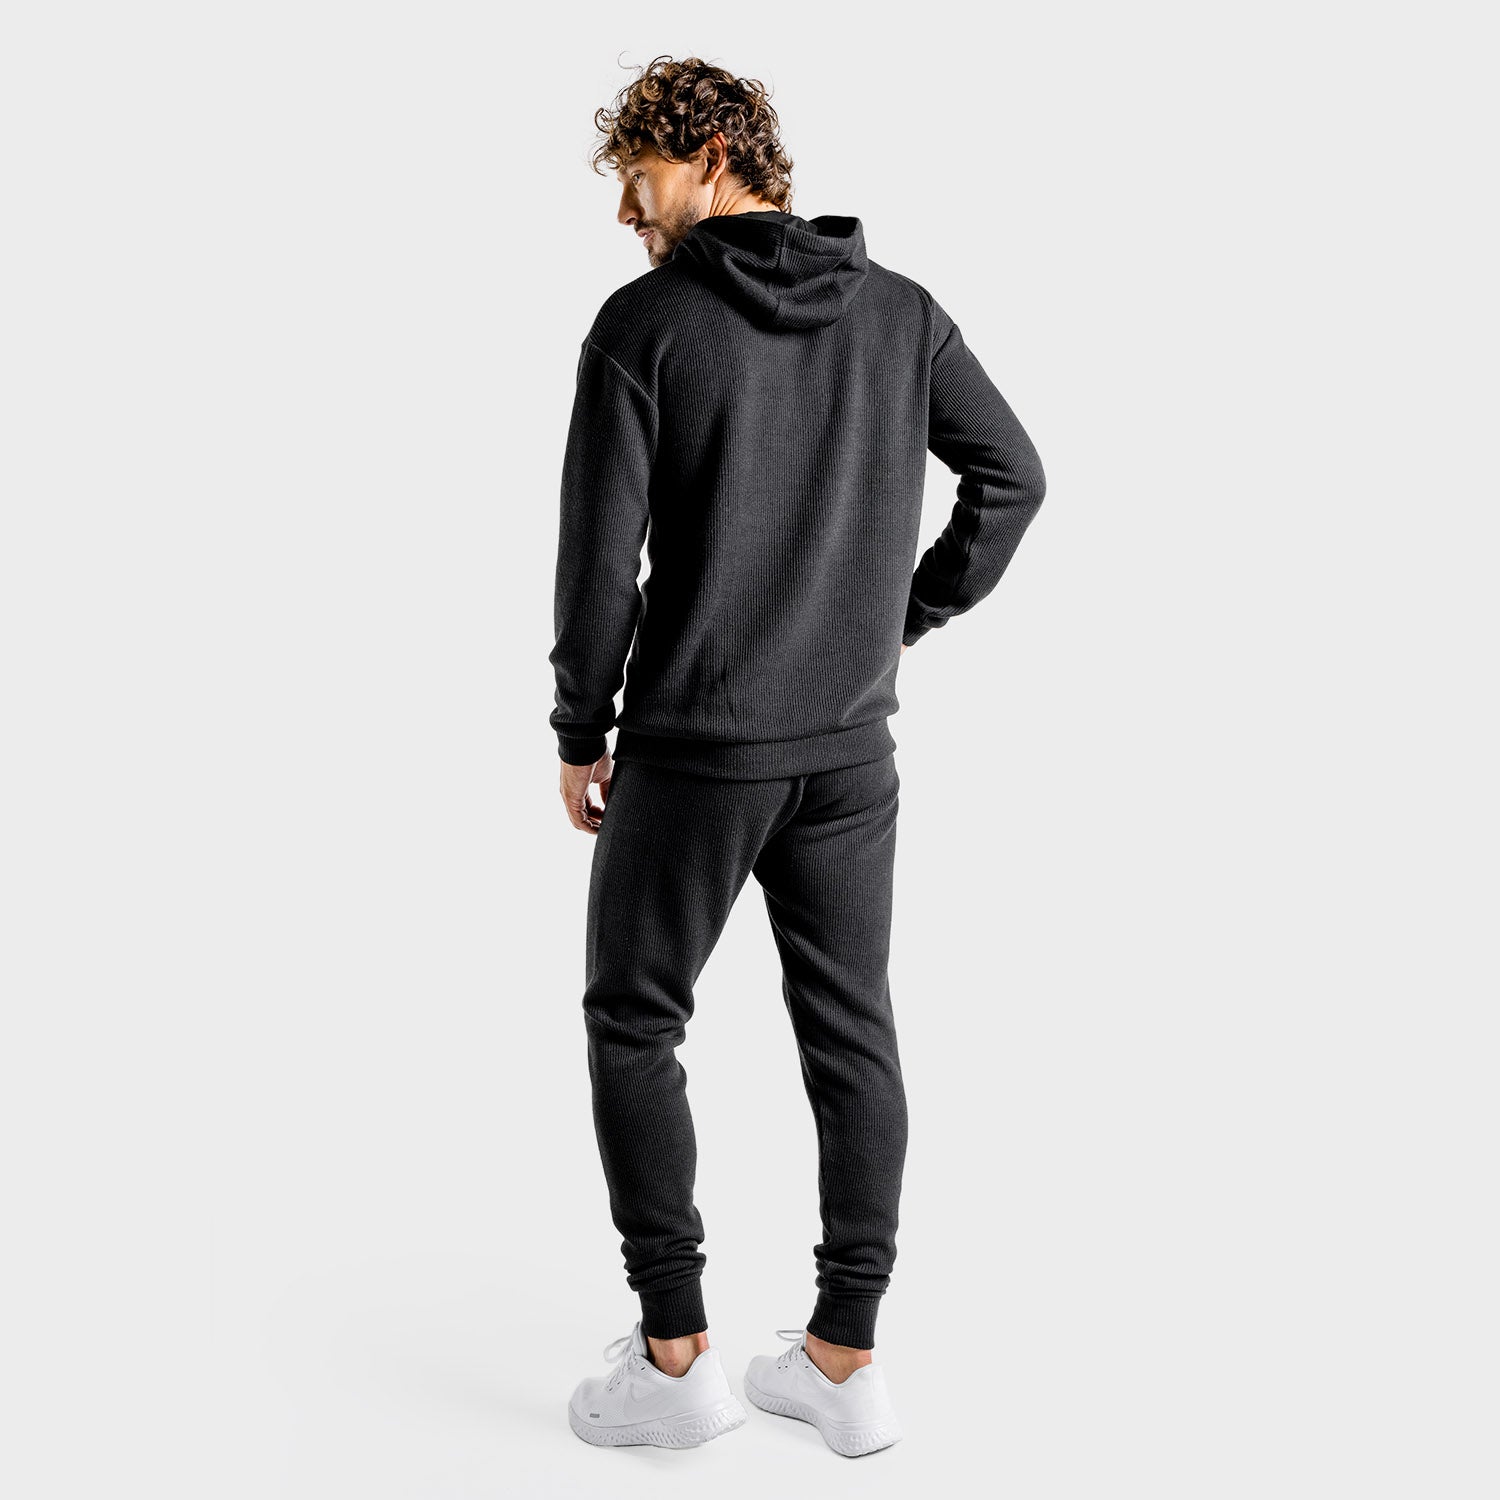 squatwolf-workout-hoodies-for-men-luxe-zip-up-black-gym-wear